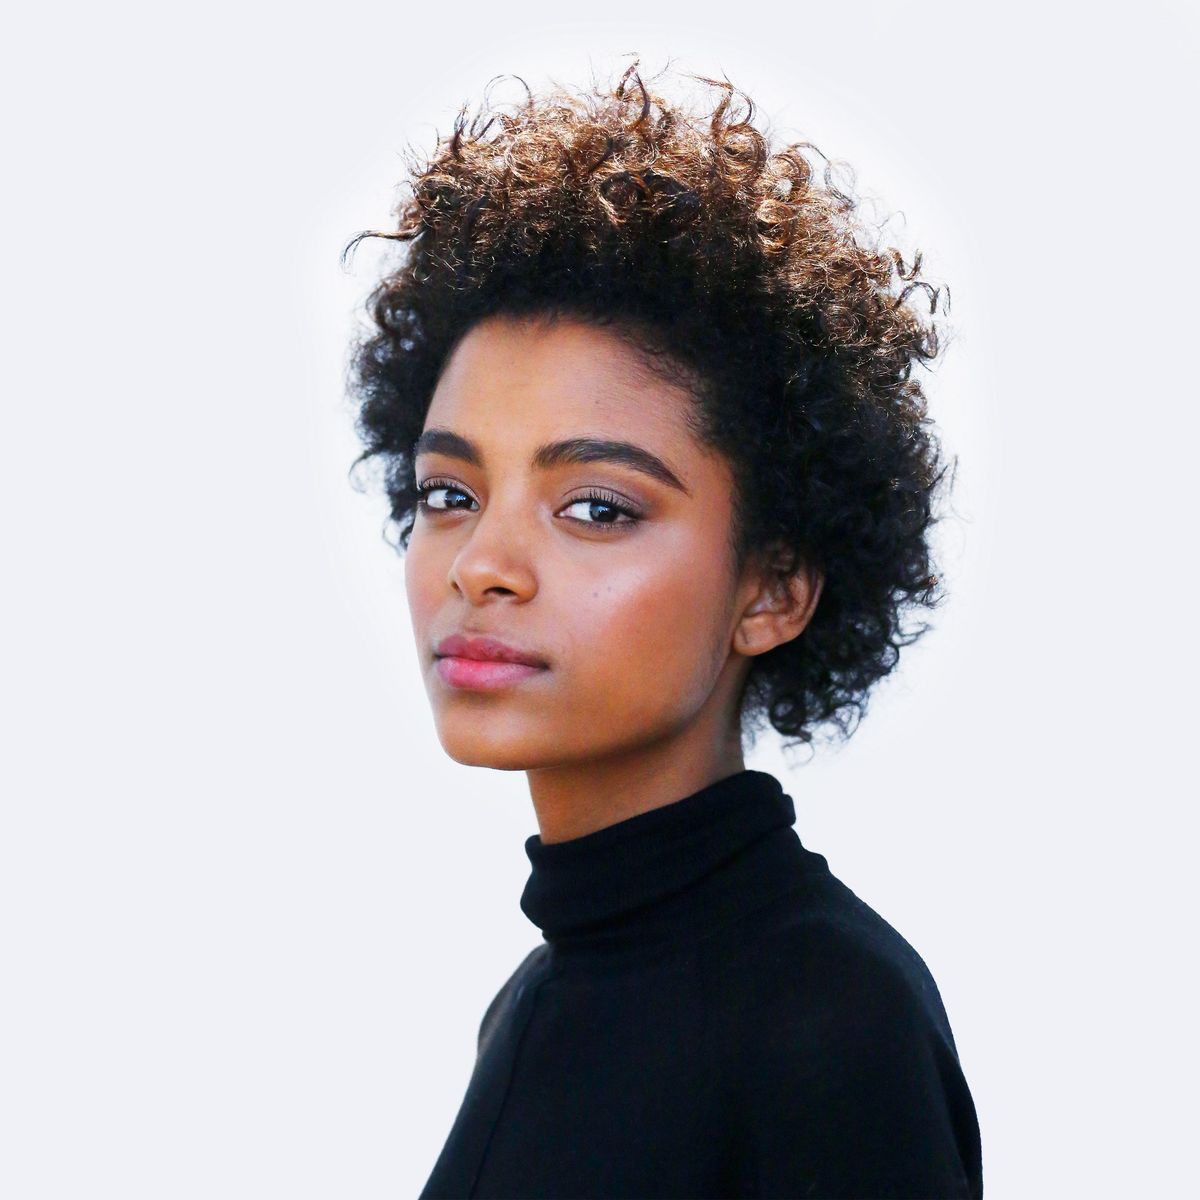 10 Questions to Ask Your Stylist Before the Big Chop